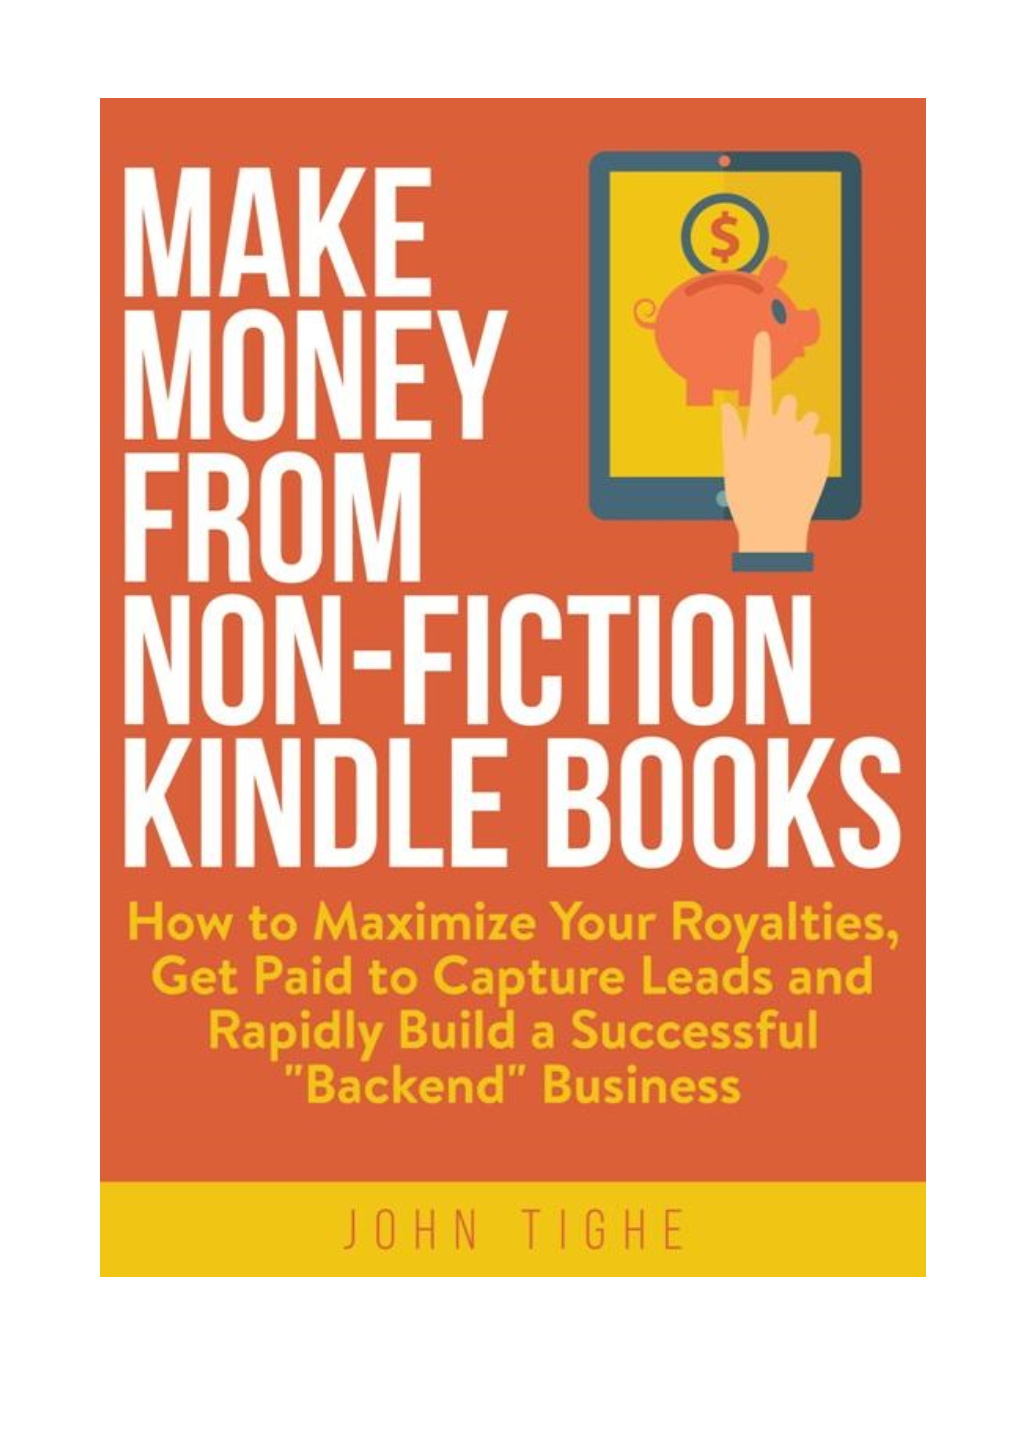 Make Money from Non-Fiction Kindle Books